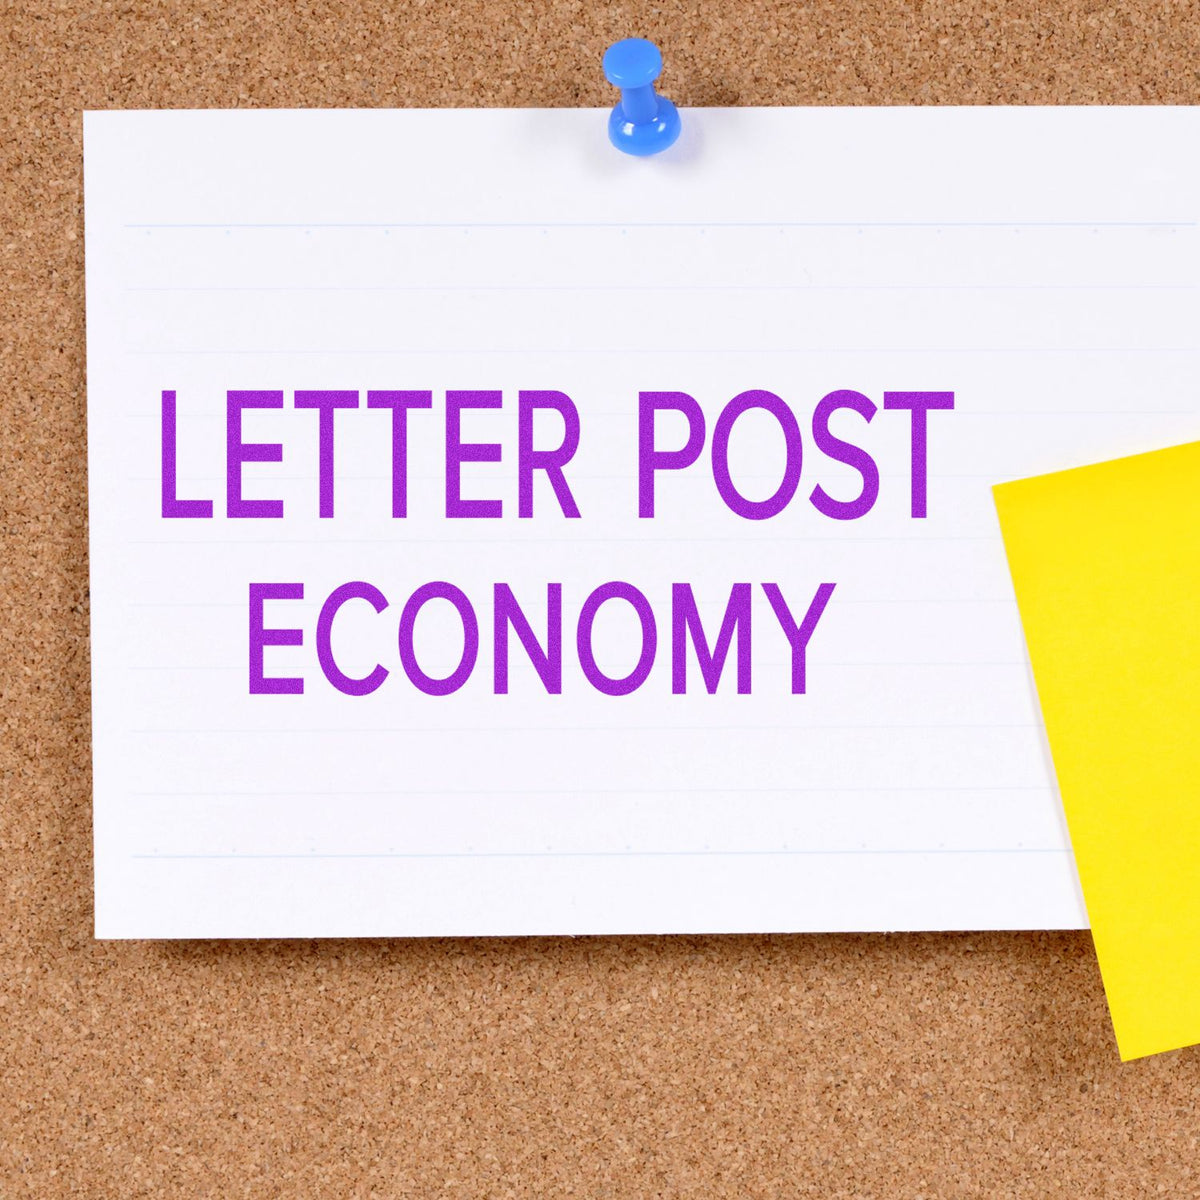 Large Letter Post Economy Rubber Stamp In Use